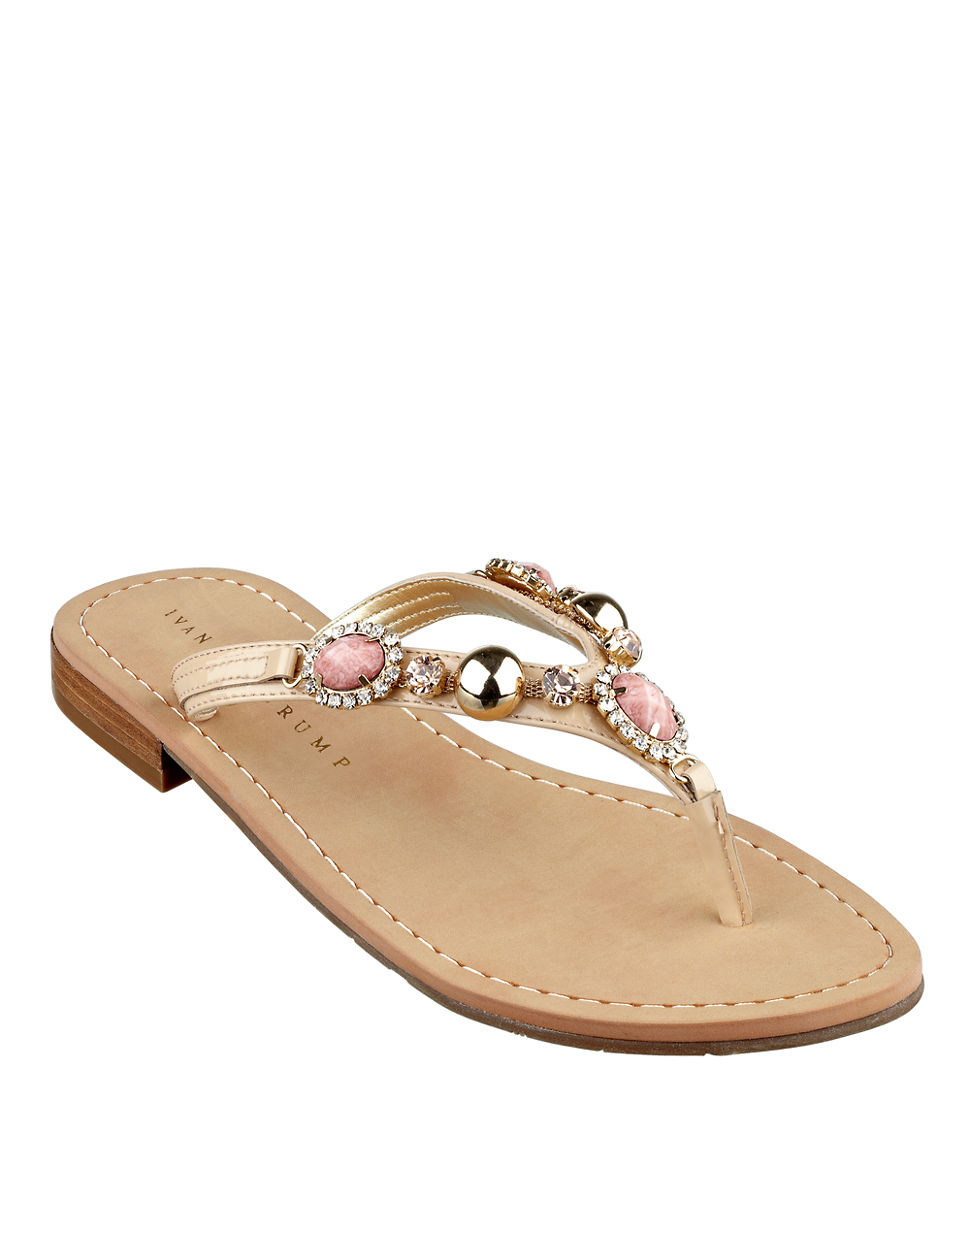 Ivanka Trump Pryor Jeweled Leather Thong Sandals in Pink (Ivory/Pink ...